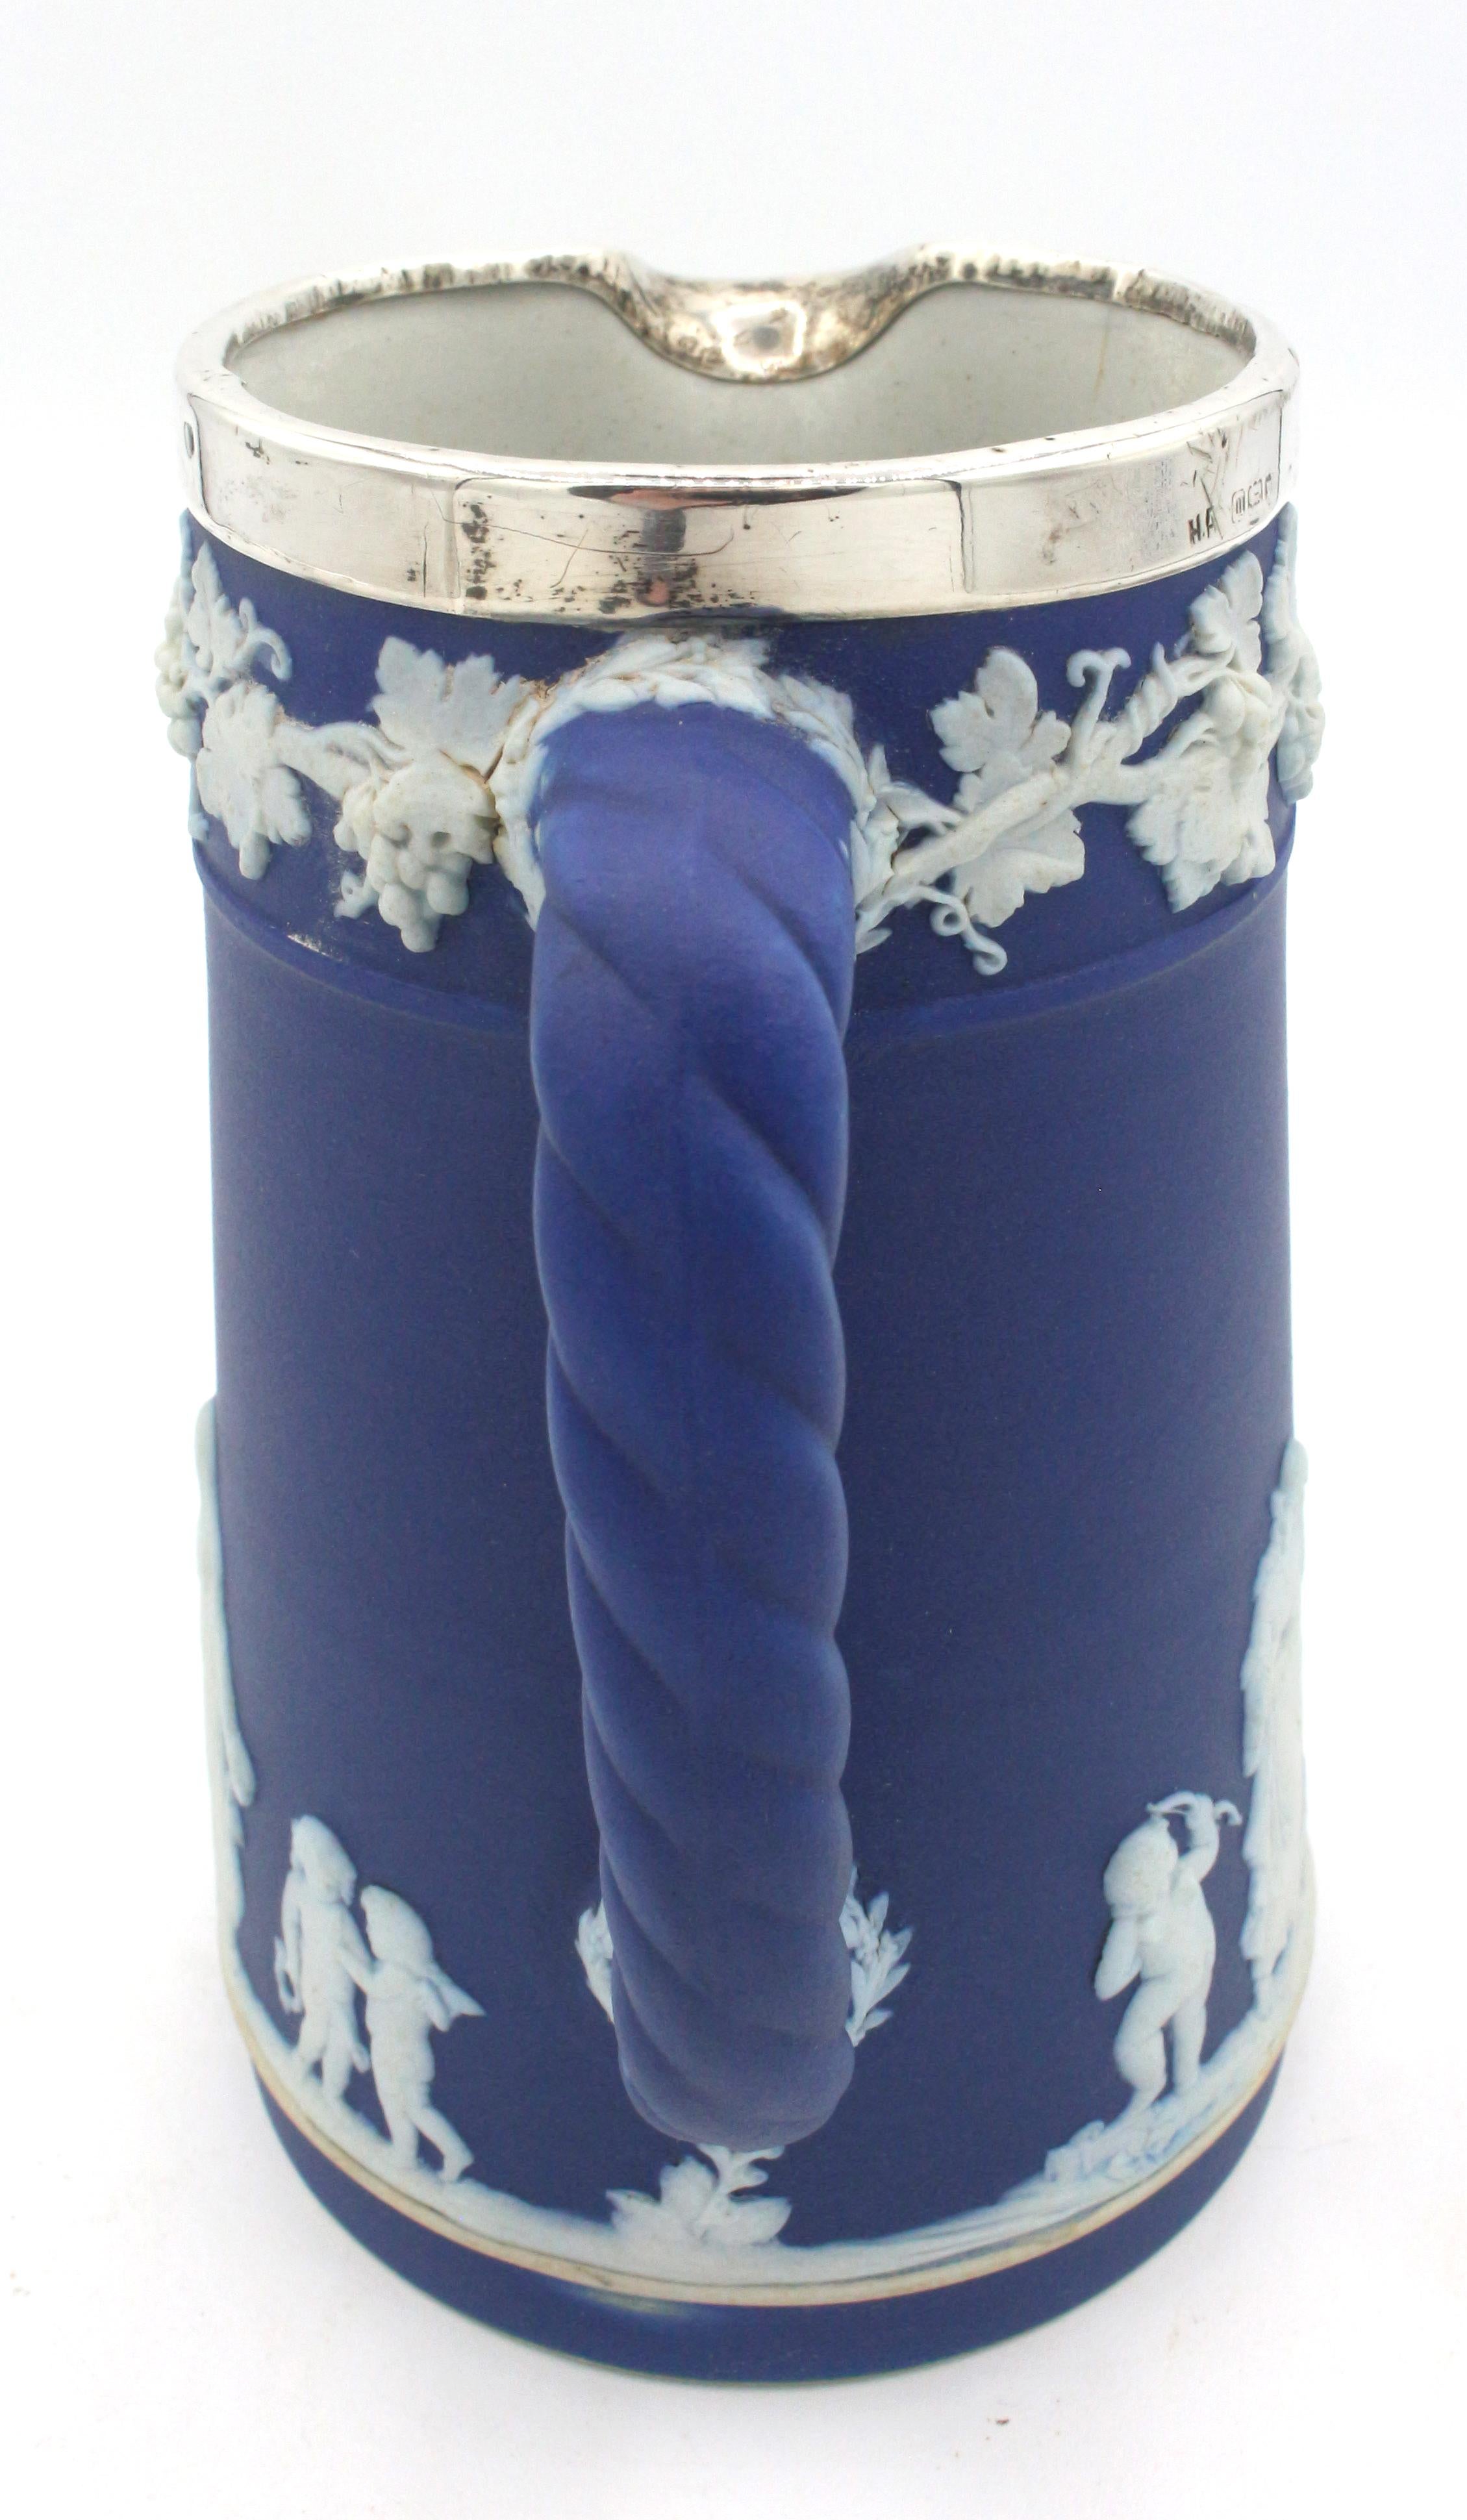 Deep blue Jasperware Wedgwood pitcher with sterling rim, London 1927. Rope handle; grapes & vines entwine with top while Greco-Roman figures adorn the body. Impressed 